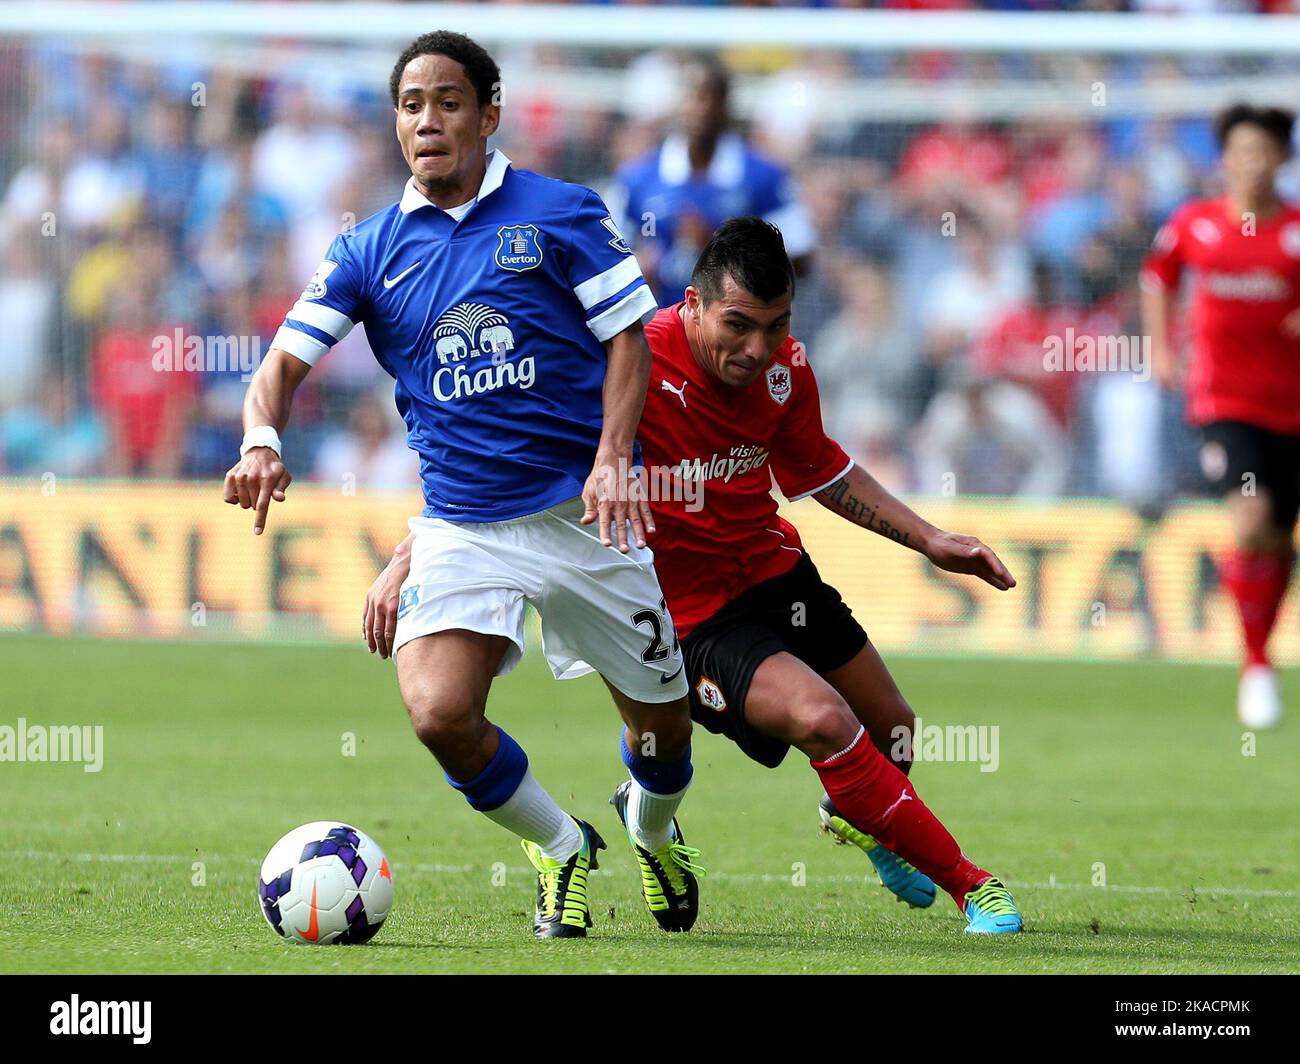 31st August 2013- Barclays Premiership - Cardiff City Vs Everton - Steven Pienaar of Everton tries to escape from Gary Medel of Cardiff City - Photo: Paul Roberts/Pathos. Stock Photo